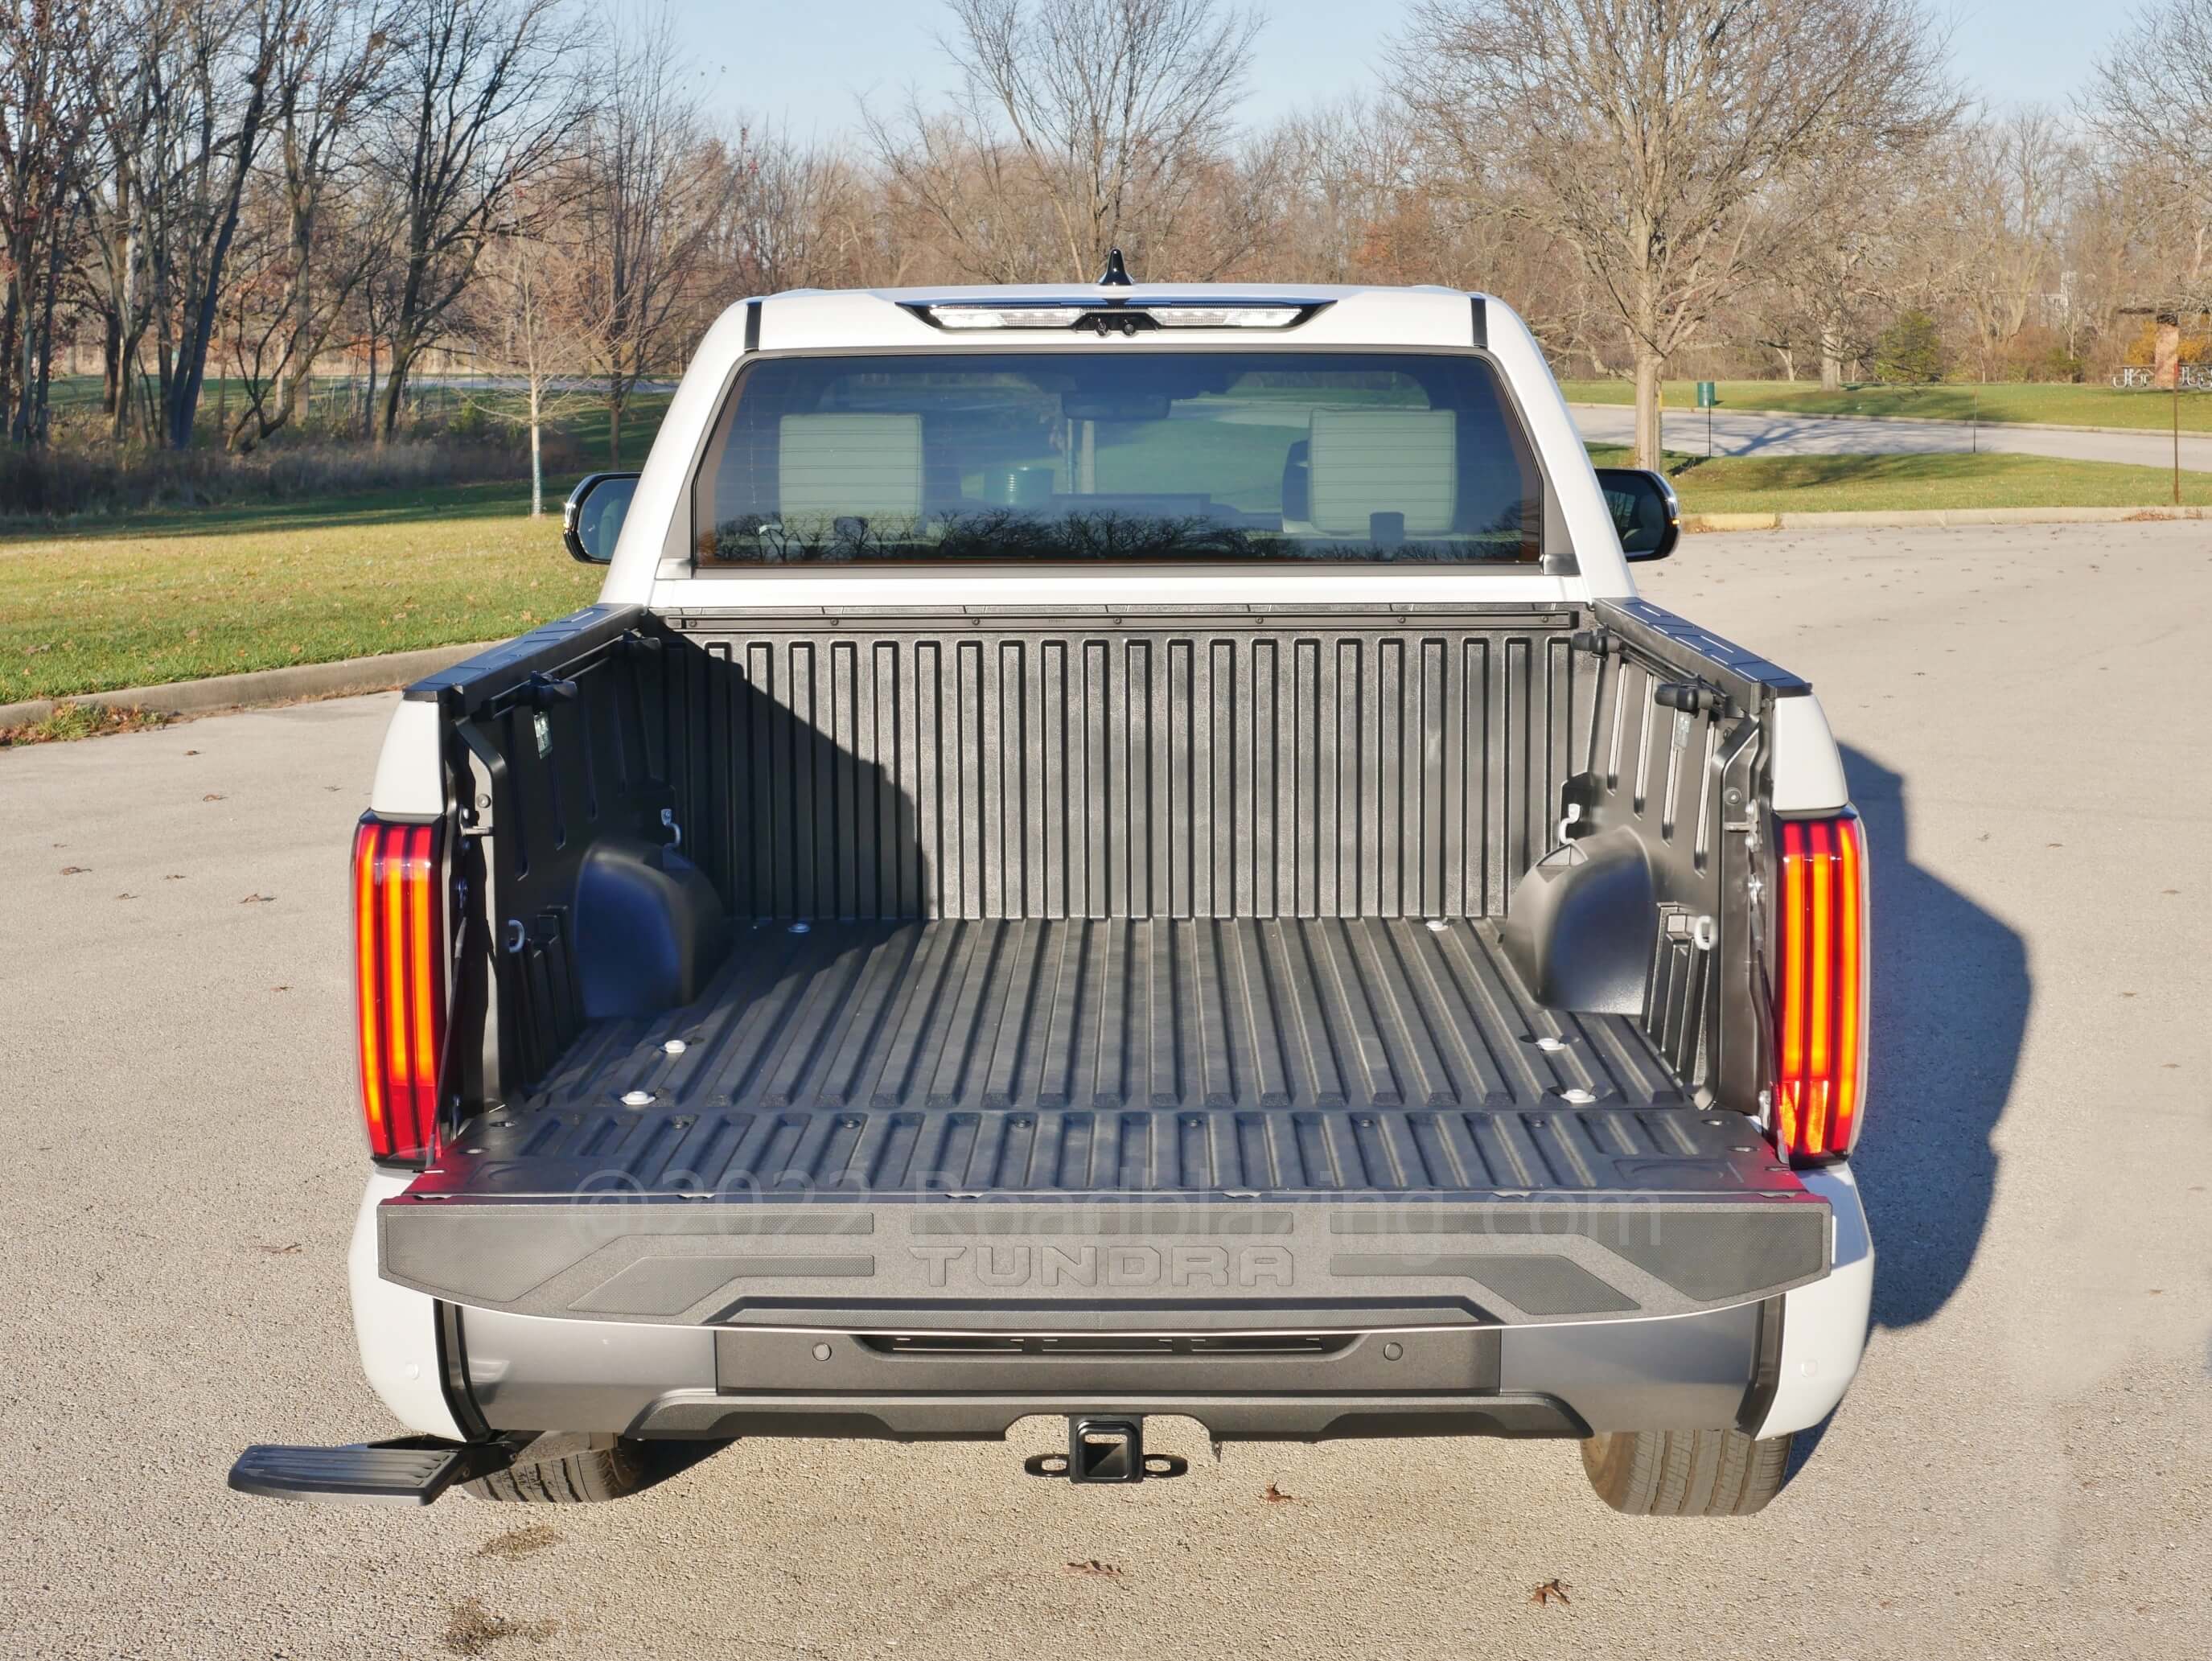 2022 Toyota Tundra CrewCab Capstone 4x4: 5'7" short bed fitted with composite liner